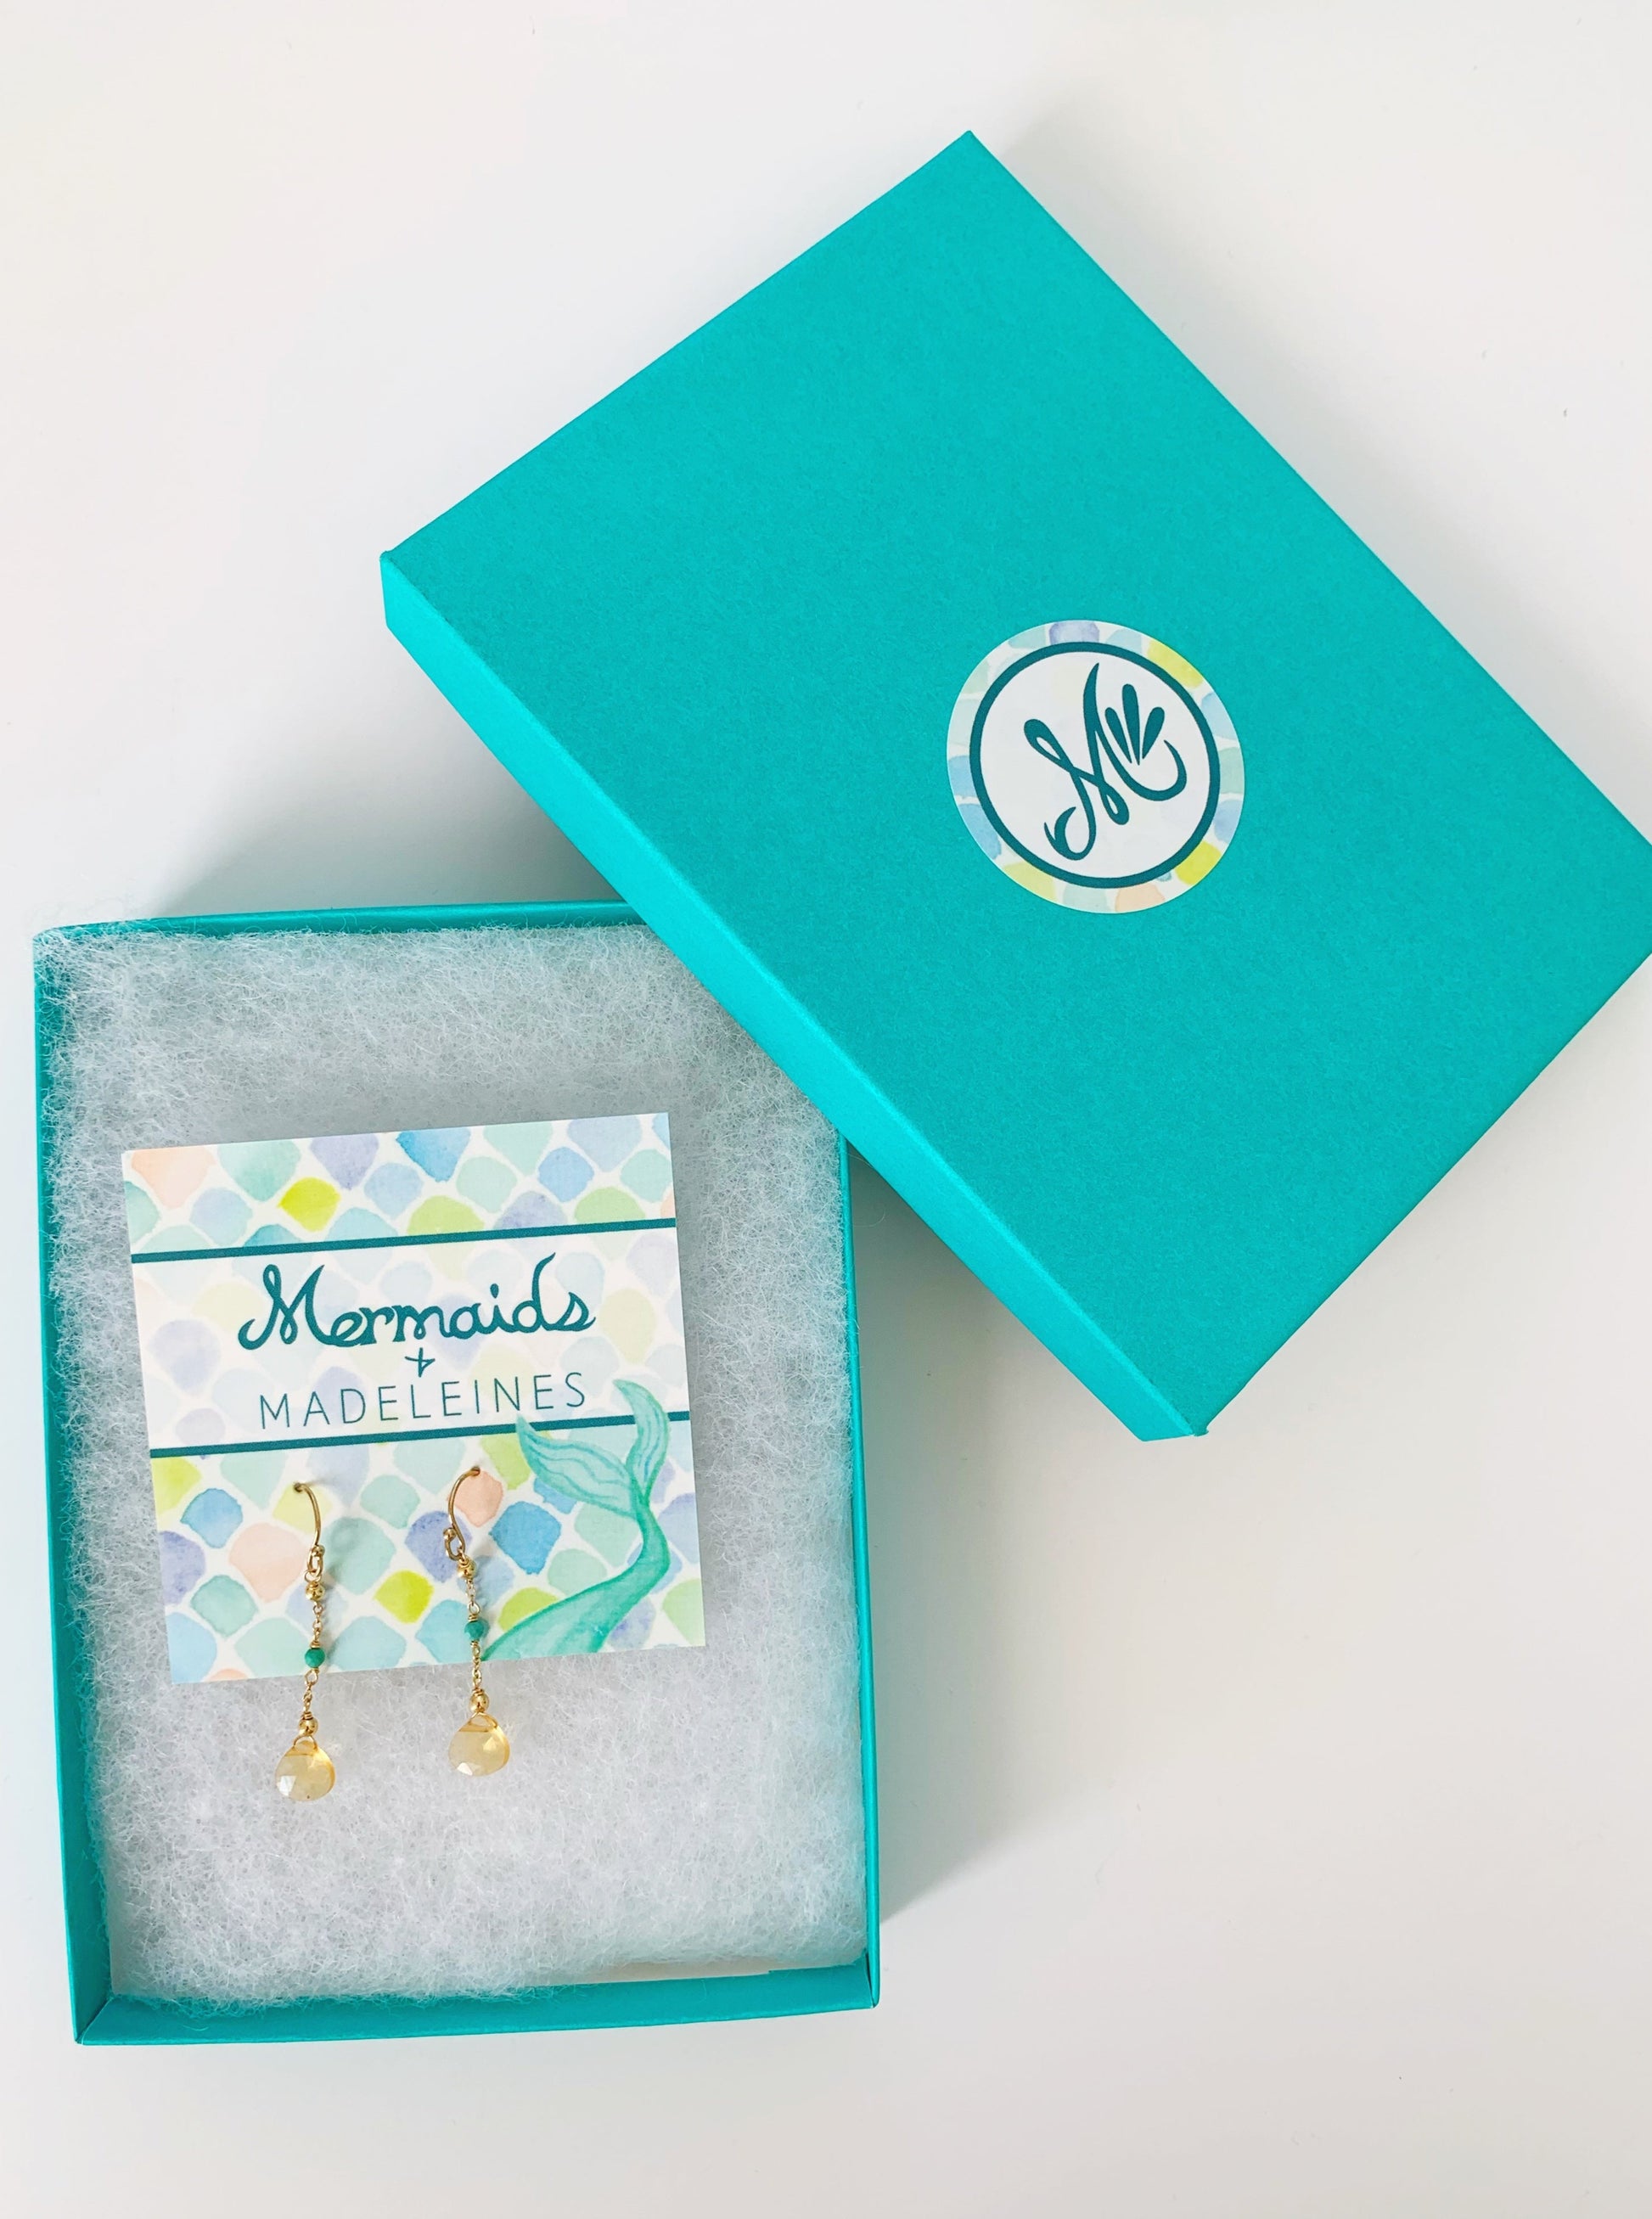 Ray of sunshine earrings photographed in a teal gift box on a white surface